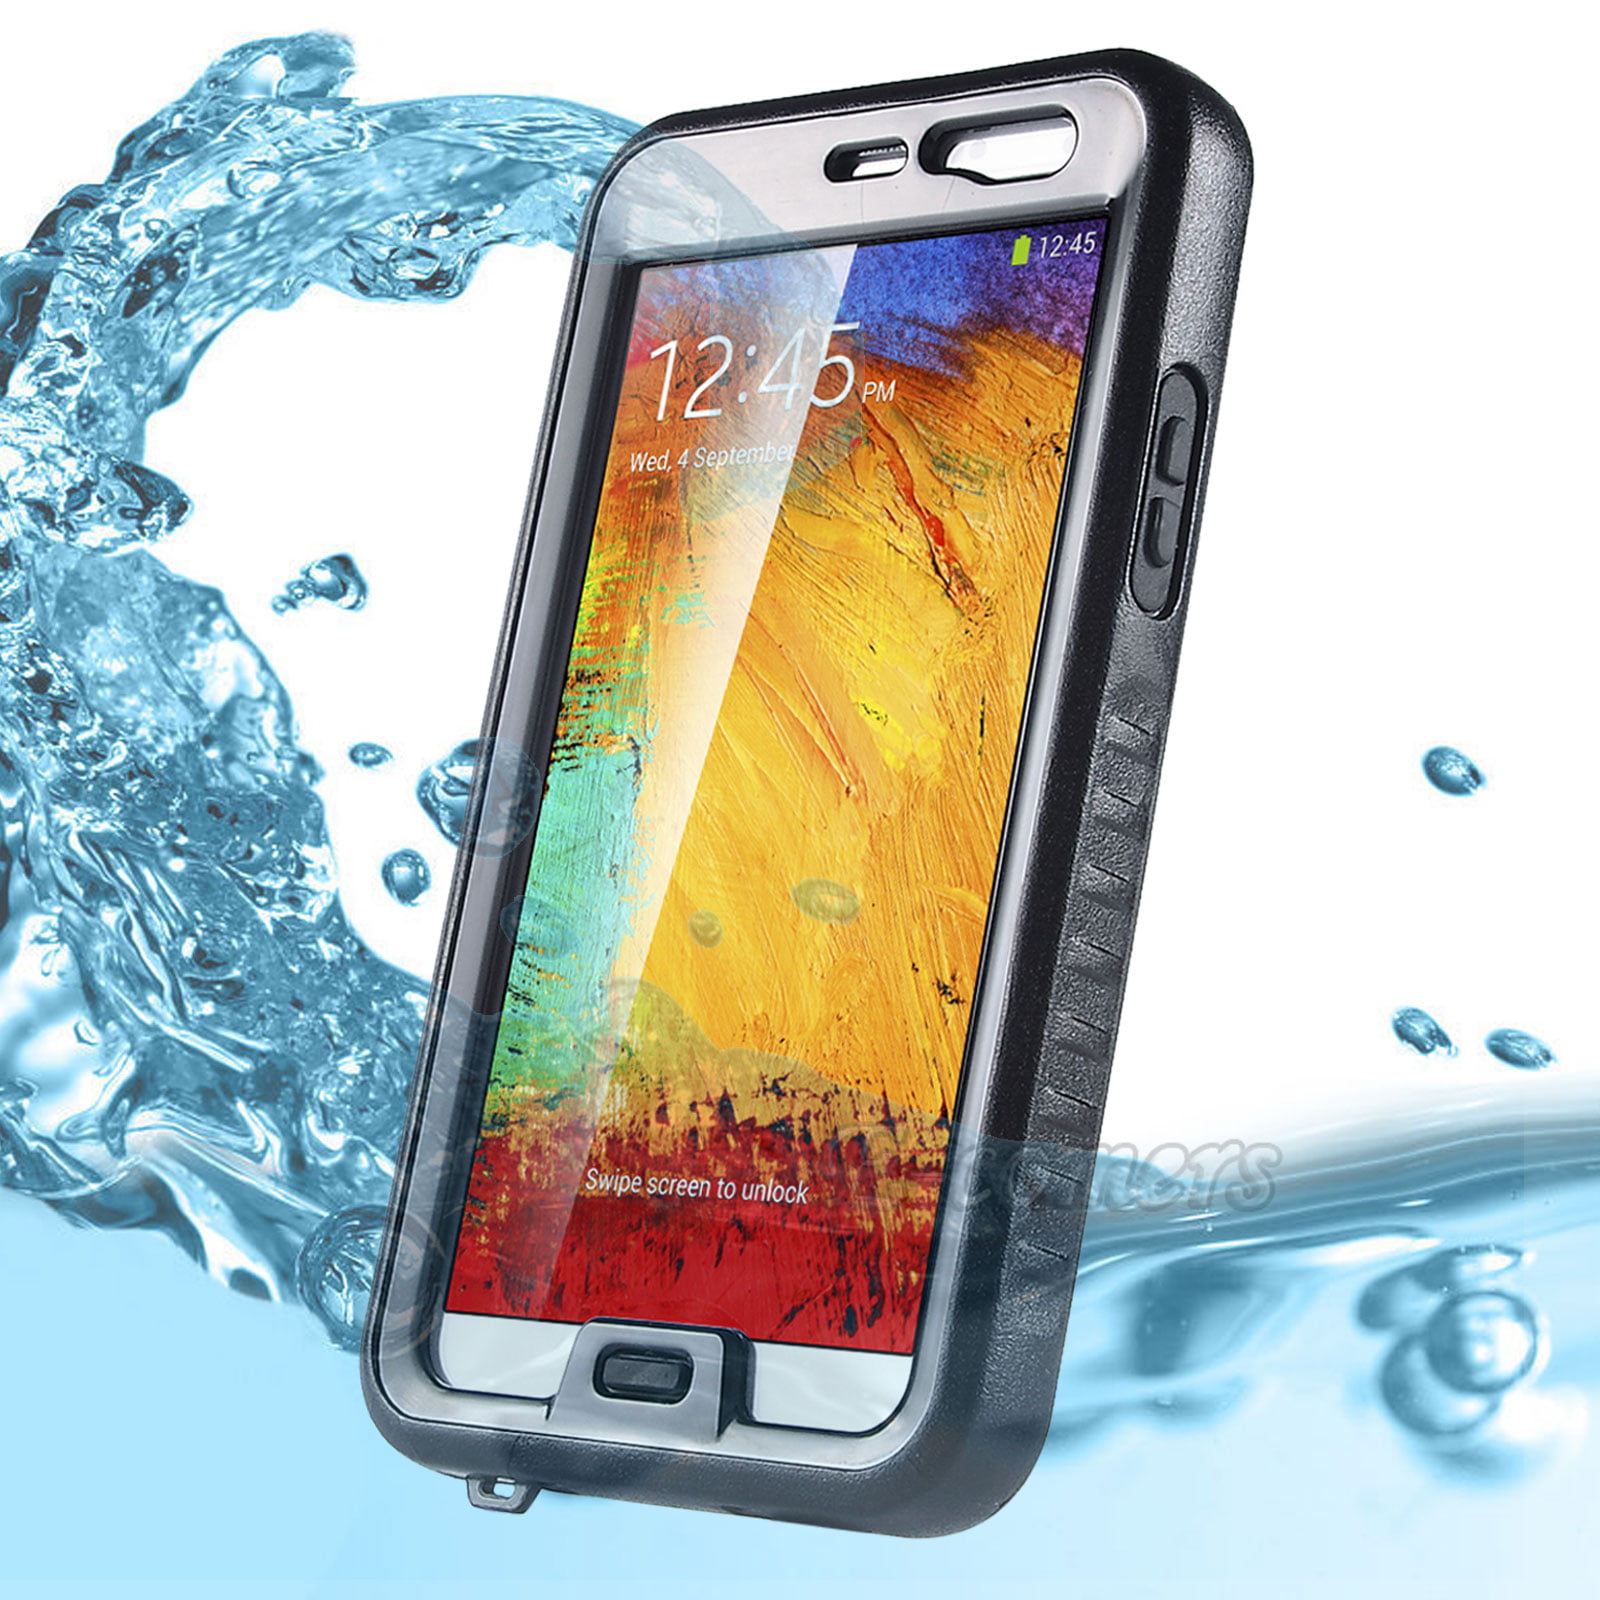 Note 3 Case, Galaxy Note 3 Case - ULAK Galaxy Note 3 Dustproof Shockproof Hard Armor Protective Cover Case Case for Samsung Galaxy Note 3 Note iii N9000 Walmart.com